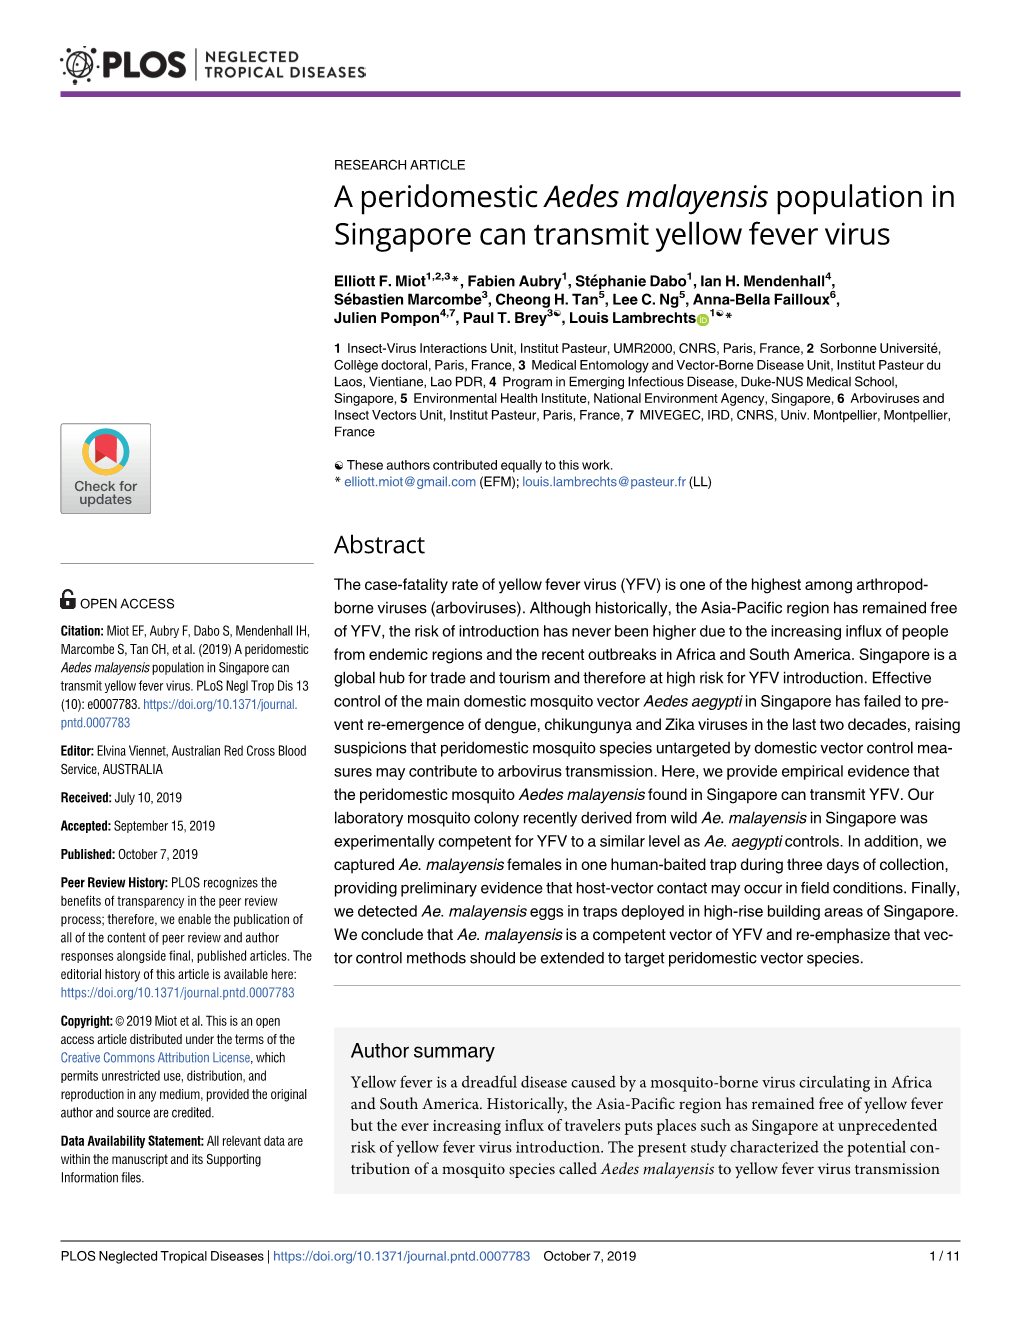 A Peridomestic Aedes Malayensis Population in Singapore Can Transmit Yellow Fever Virus